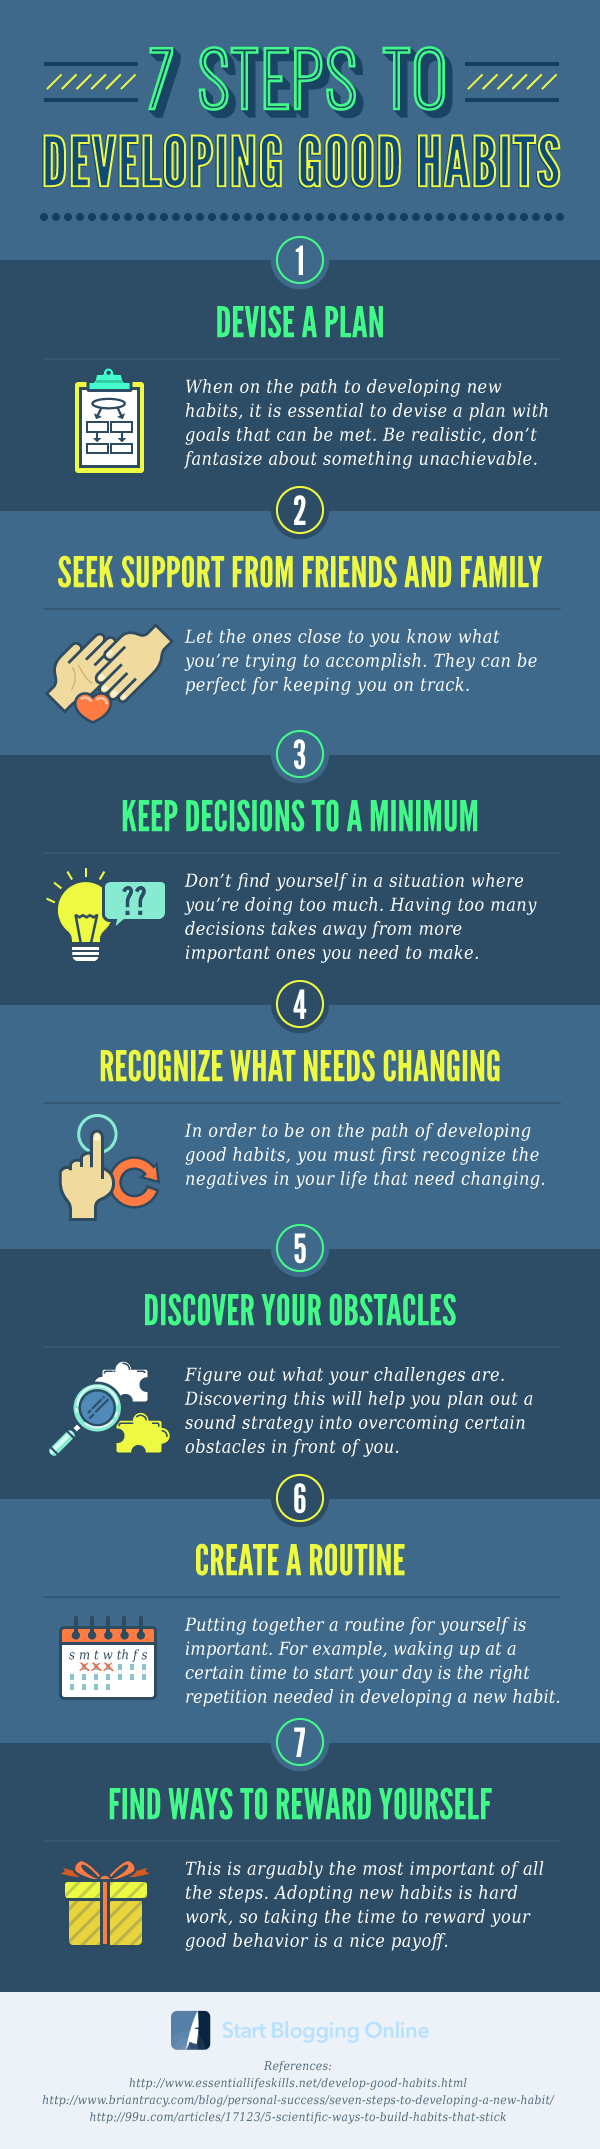 Changing Tracks: Developing Good Habits in 7 Easy Steps - Infographic